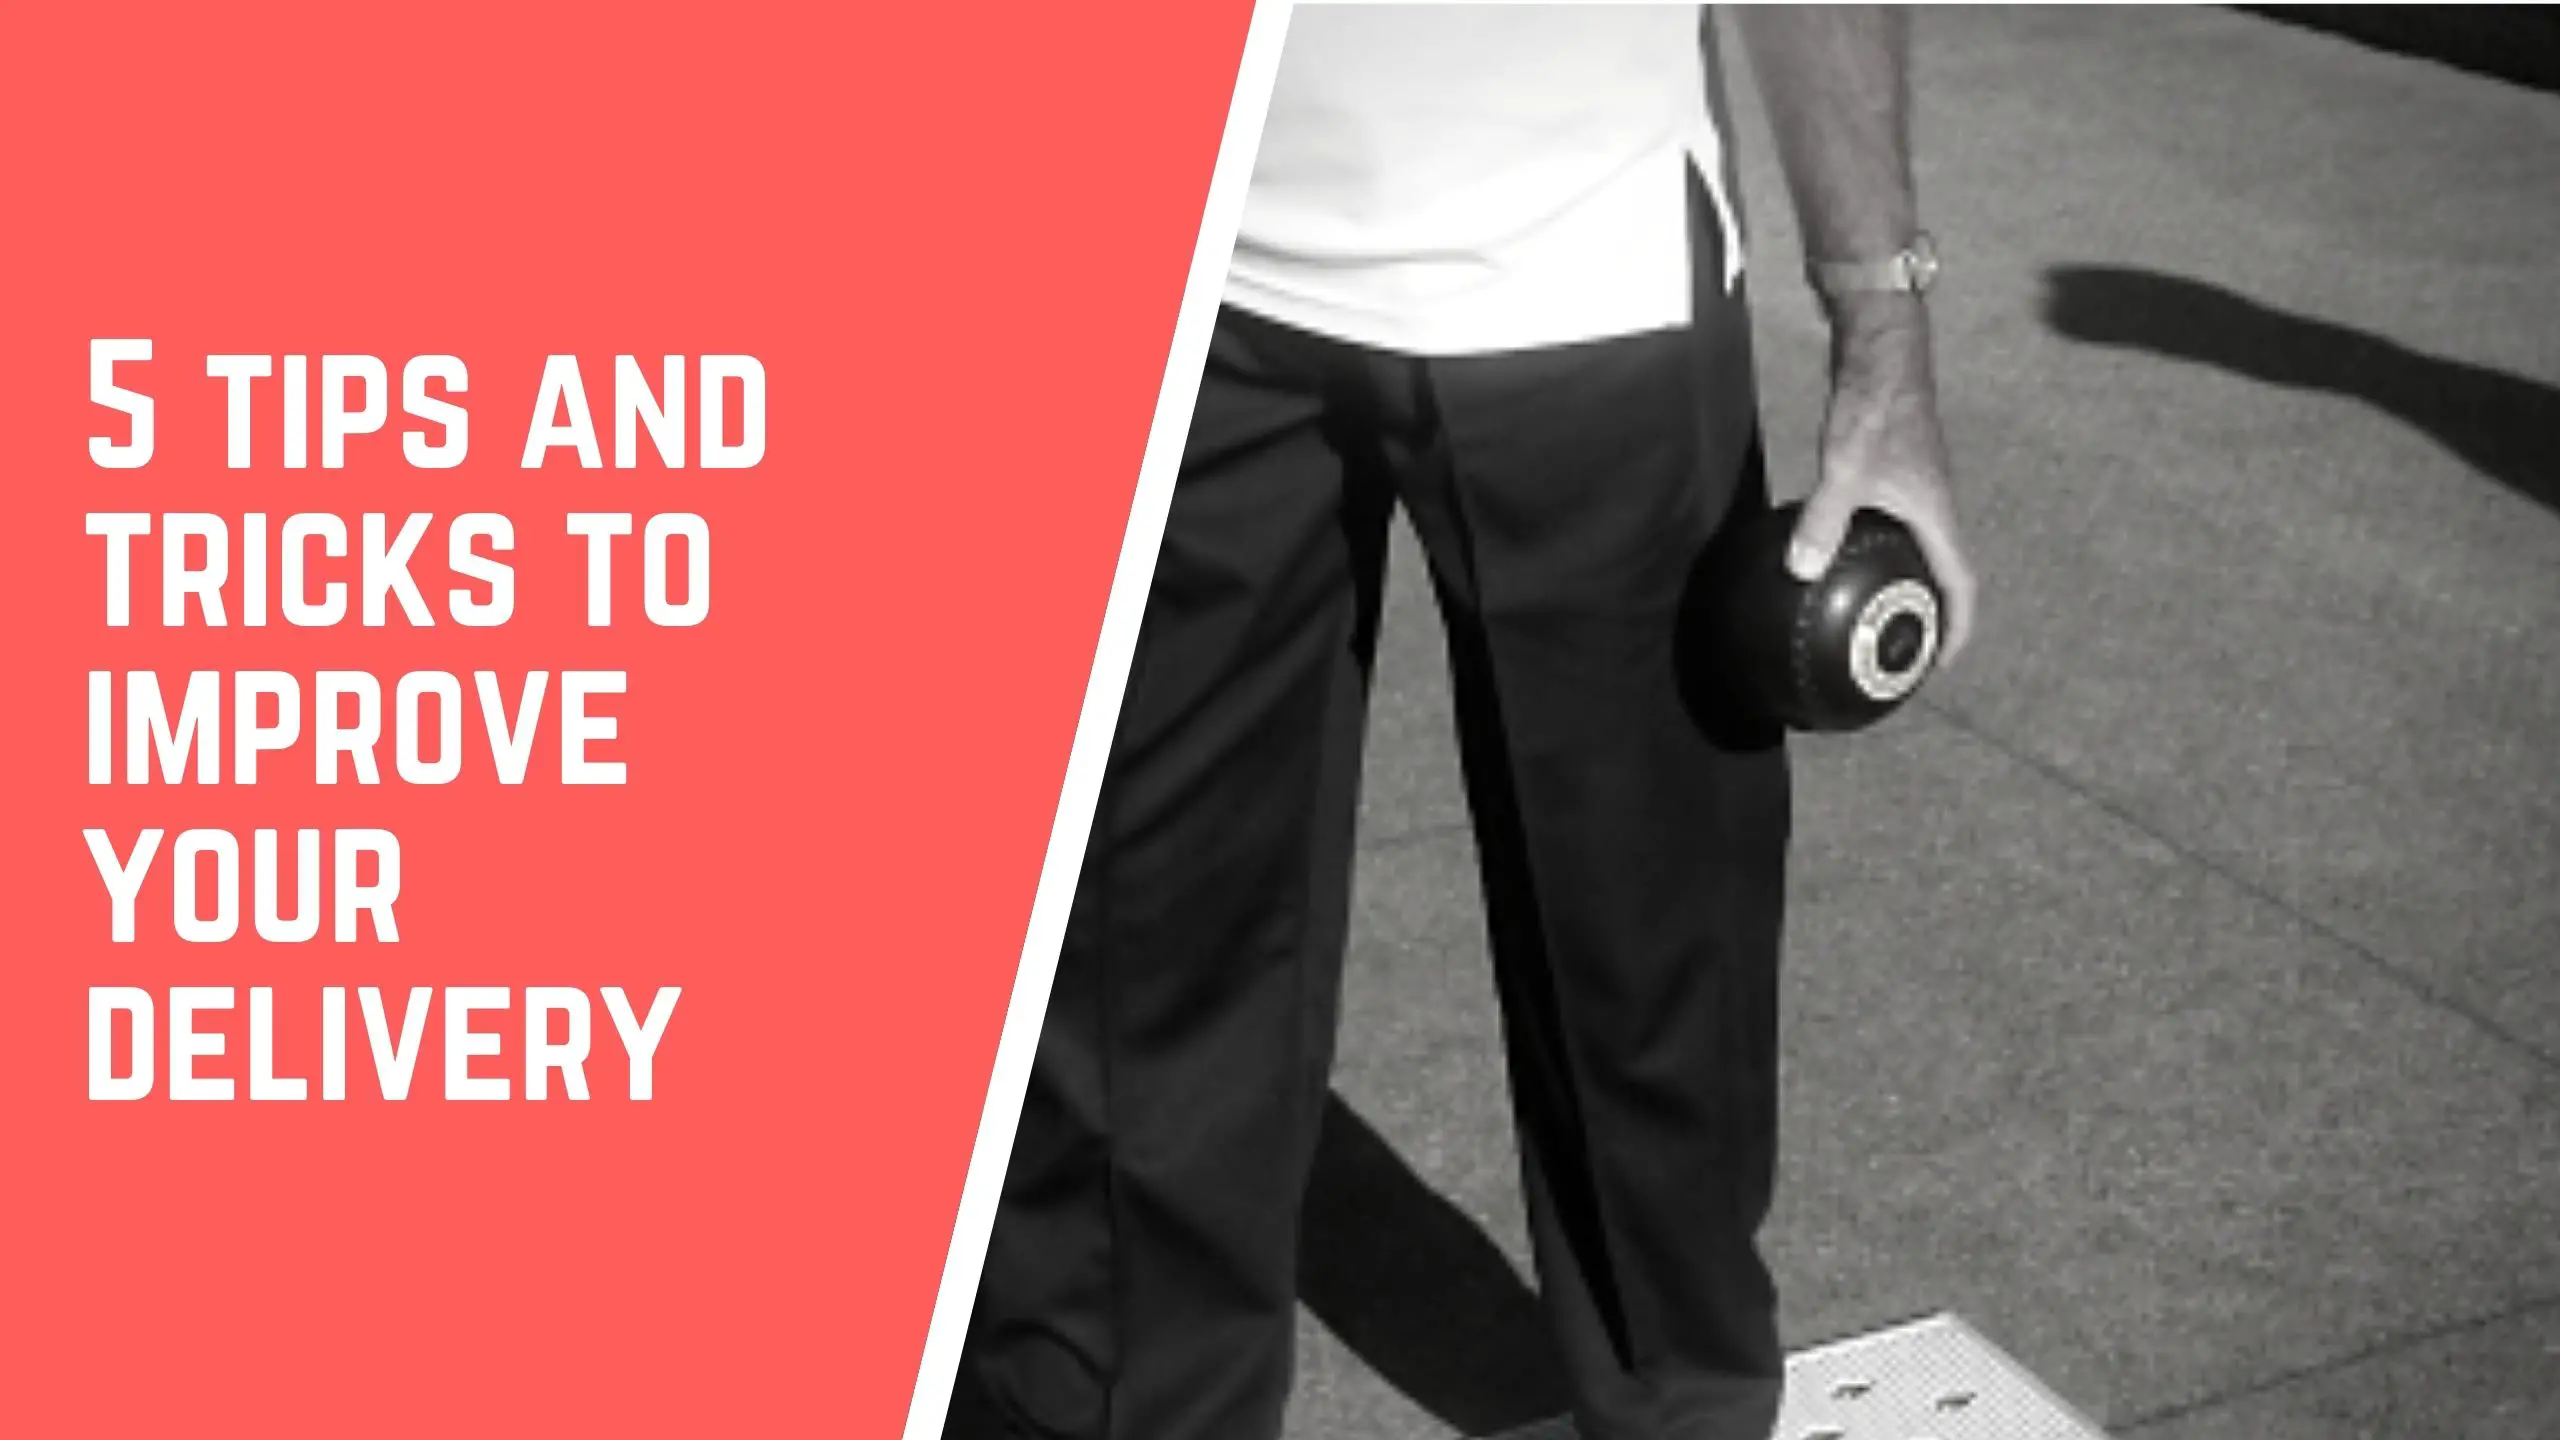 5 Tips And Tricks To Improve Your Lawn Bowls Delivery